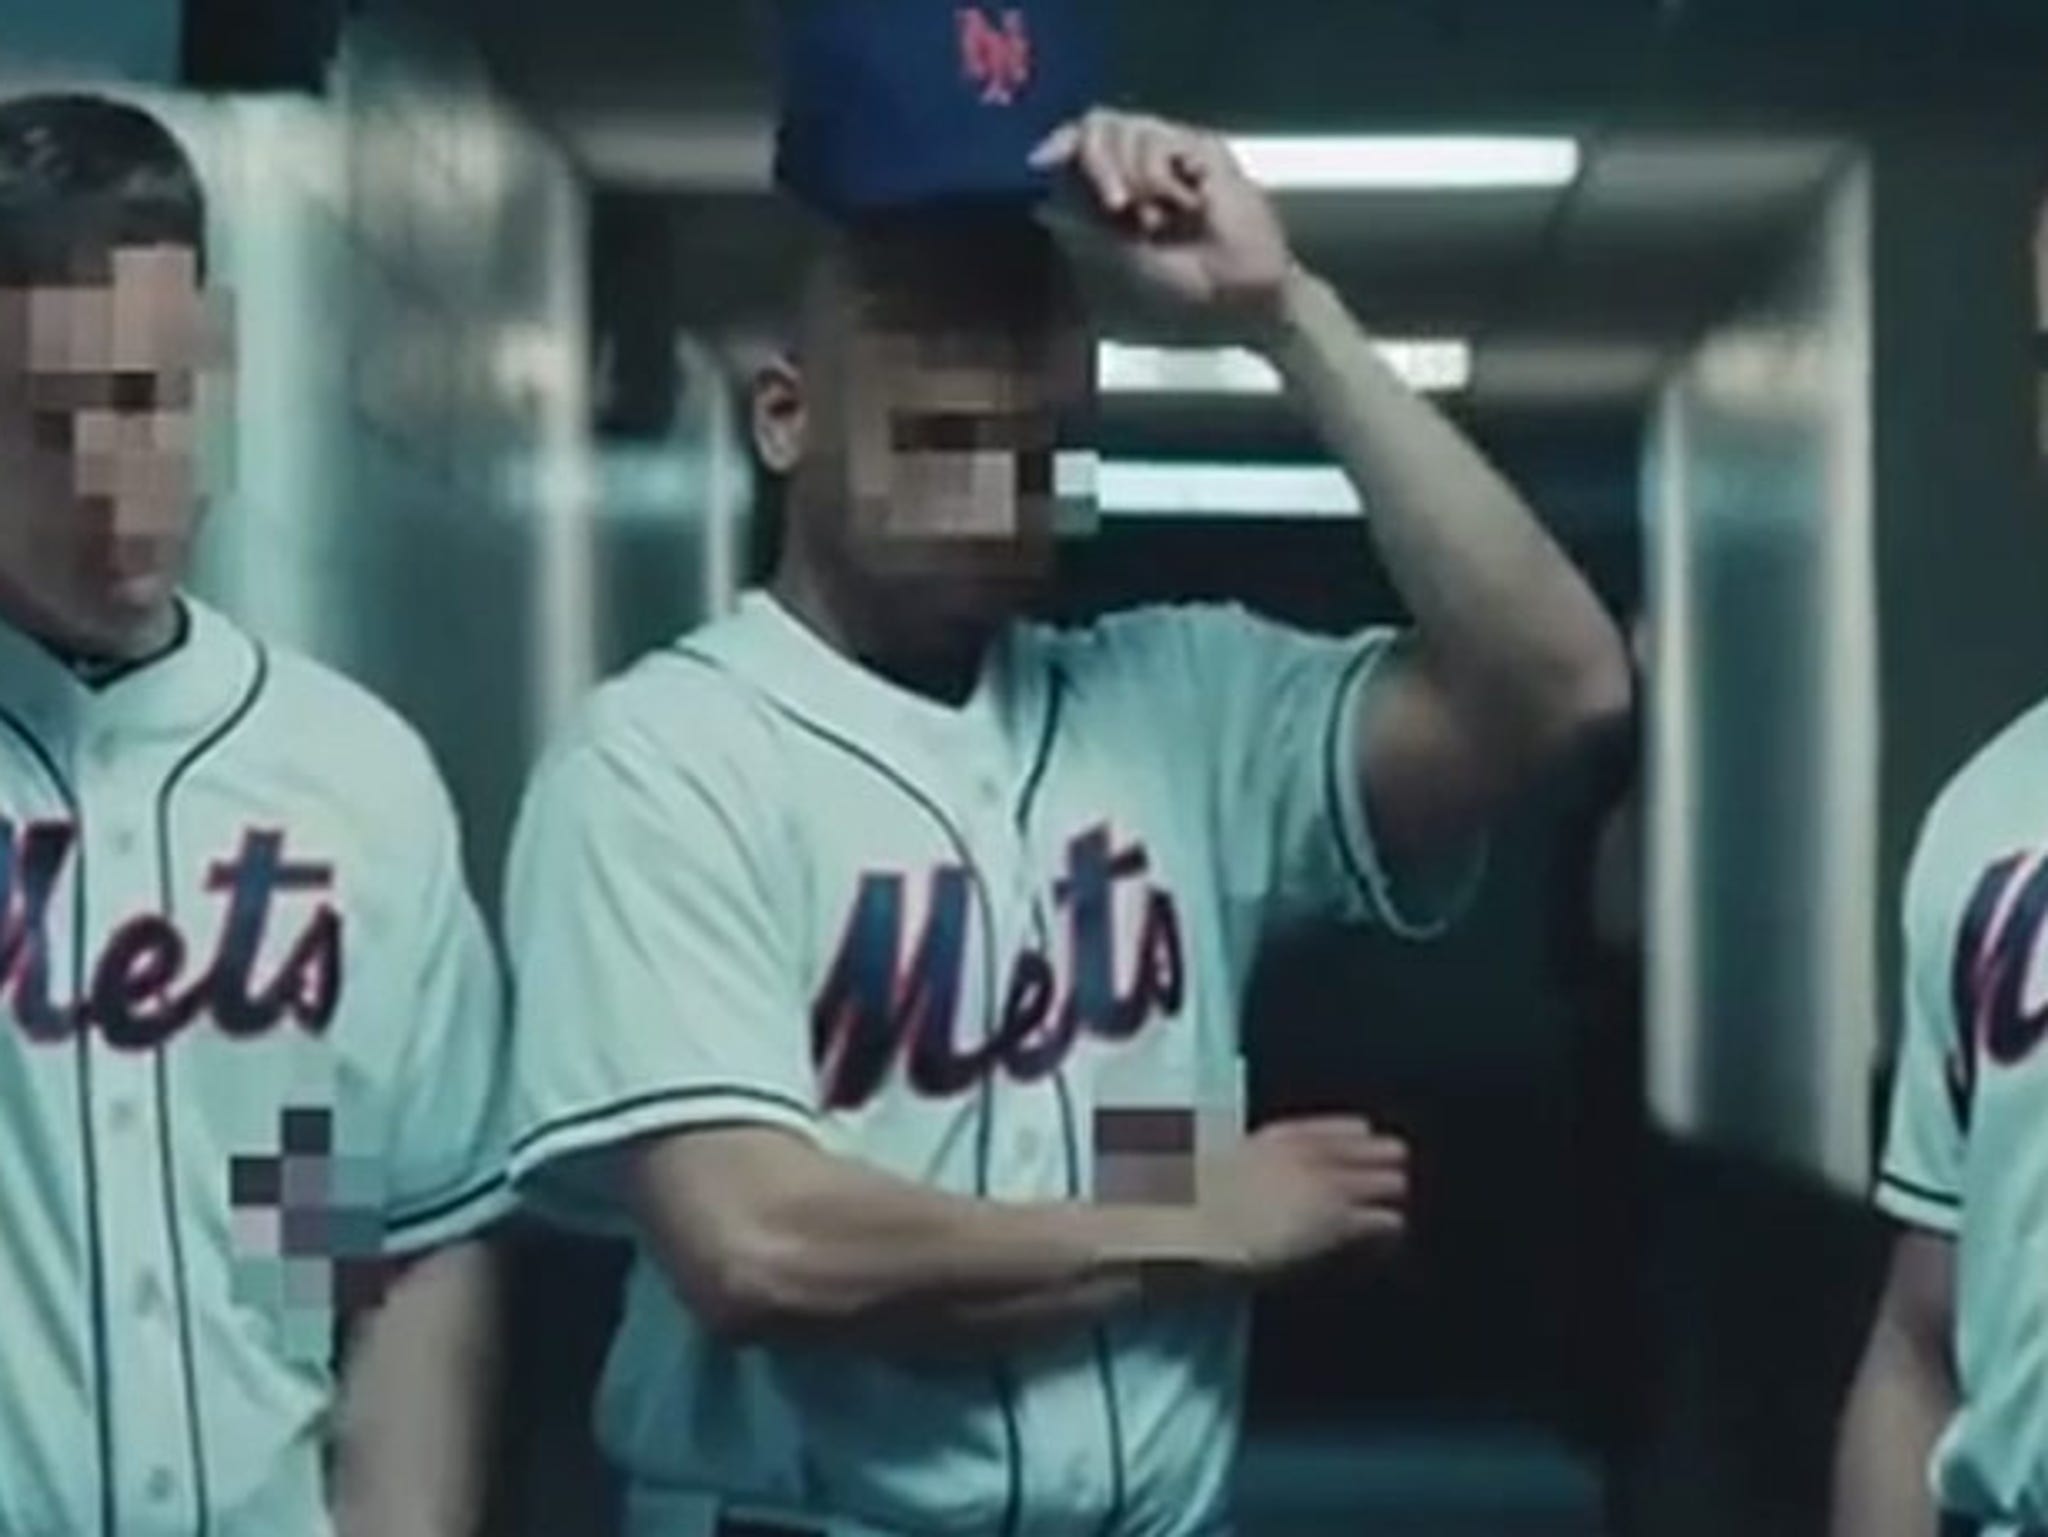 Derek Jeter Commercial -- Those Mets Players  ARE FRAUDS!!!